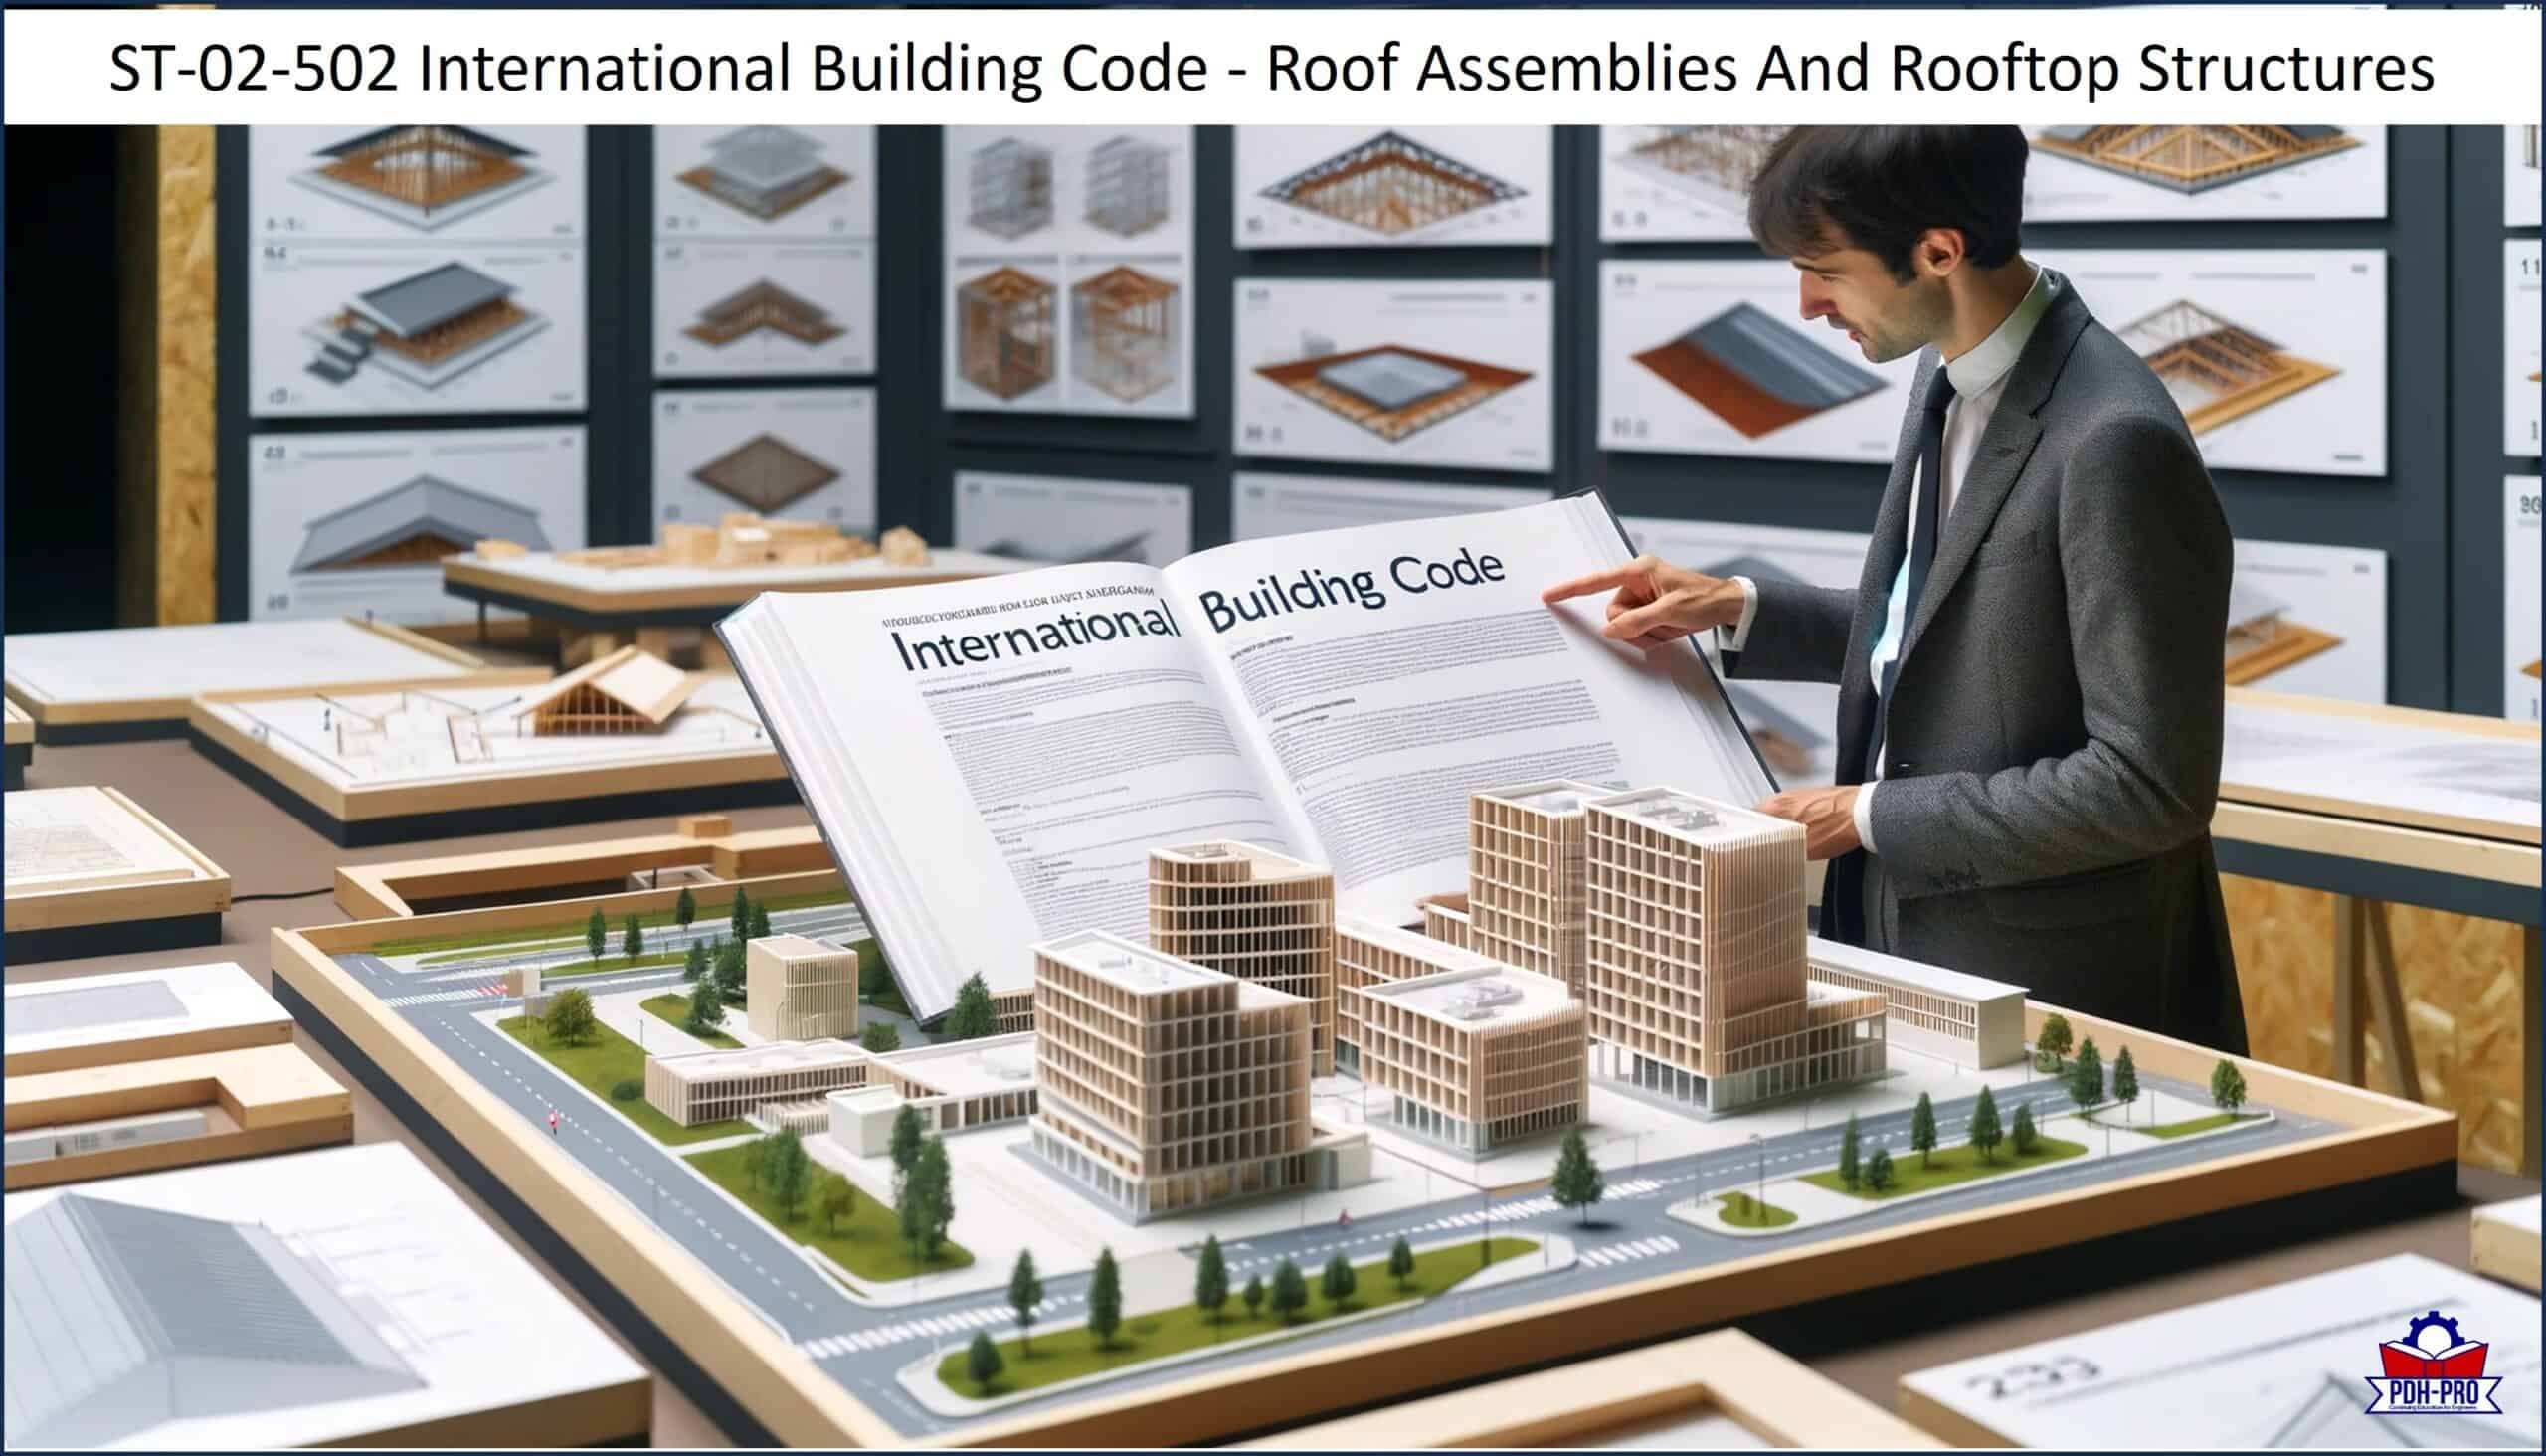 International Building Code - Roof Assemblies And Rooftop Structures